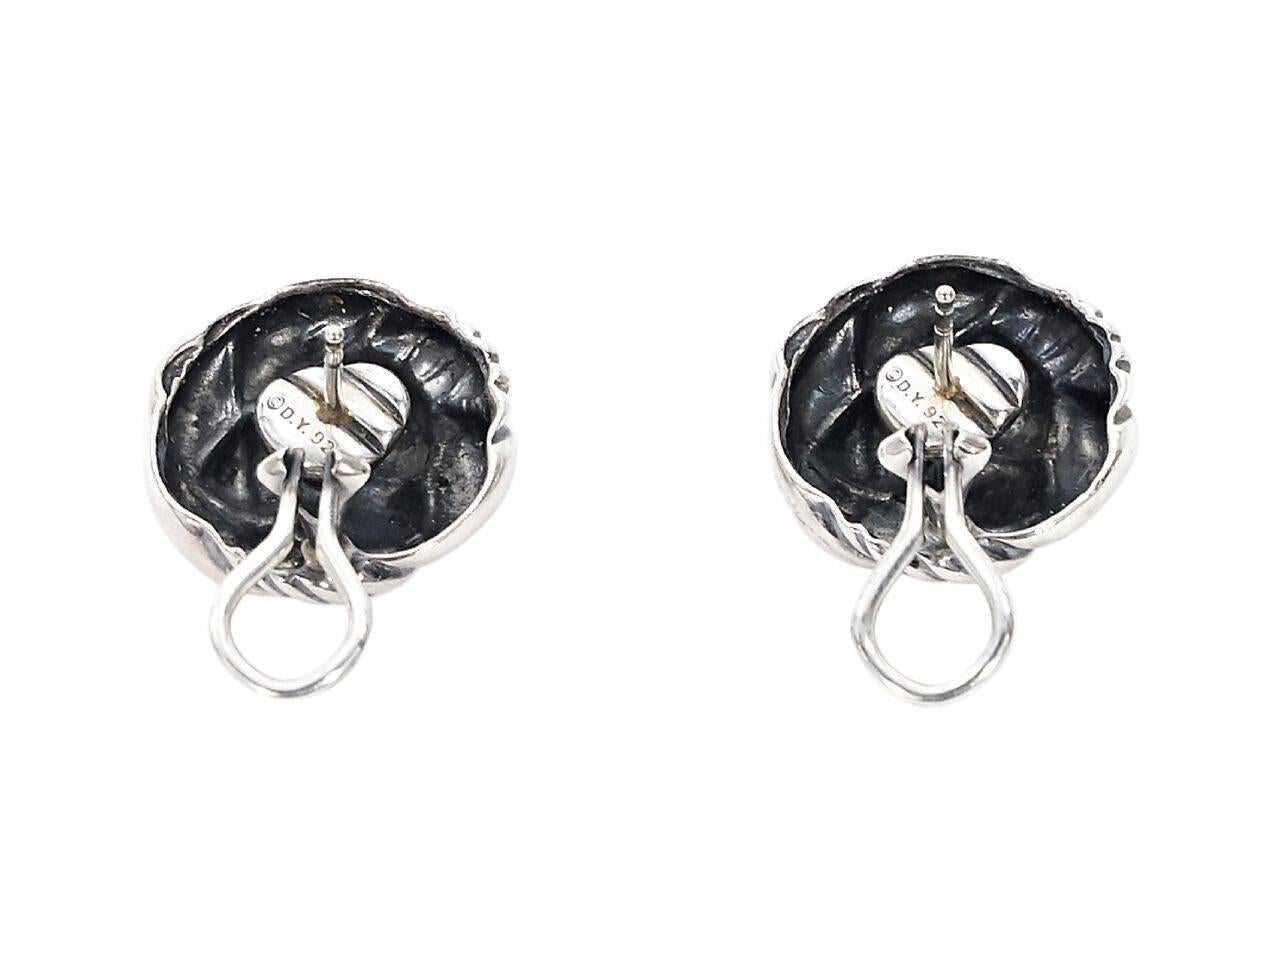 Product details:  Round silver knot earrings by David Yurman.  Post and clip back closure.  
Condition: Pre-owned. Very good.
Est. Retail $ 850.00